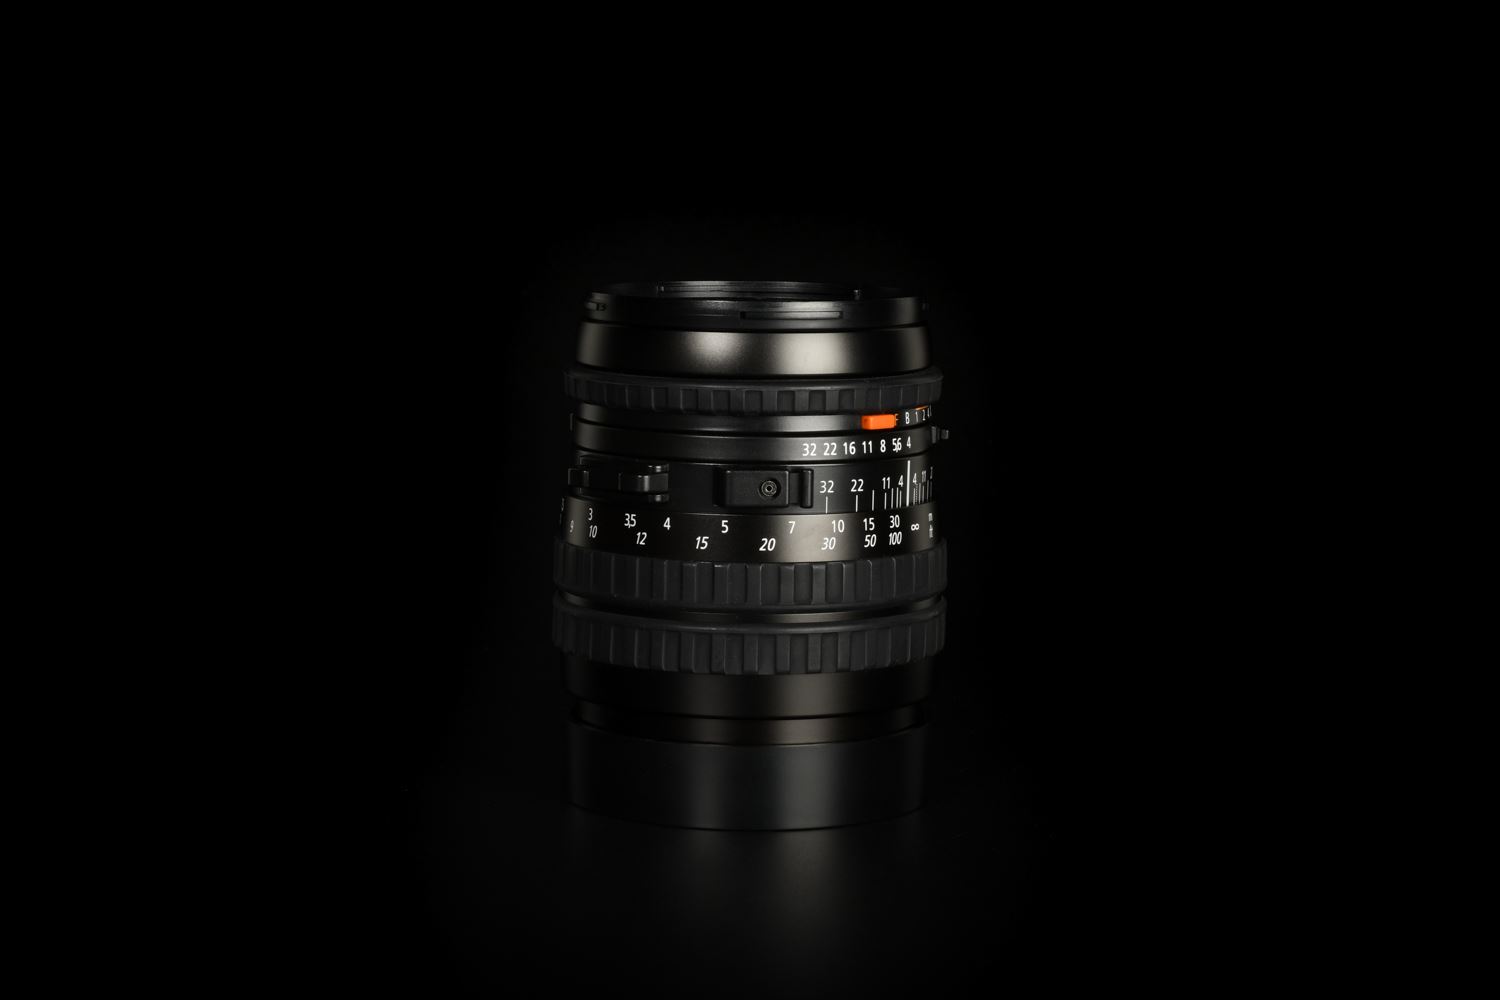 Picture of Hasselblad Cfi Sonnar 150mm f/4